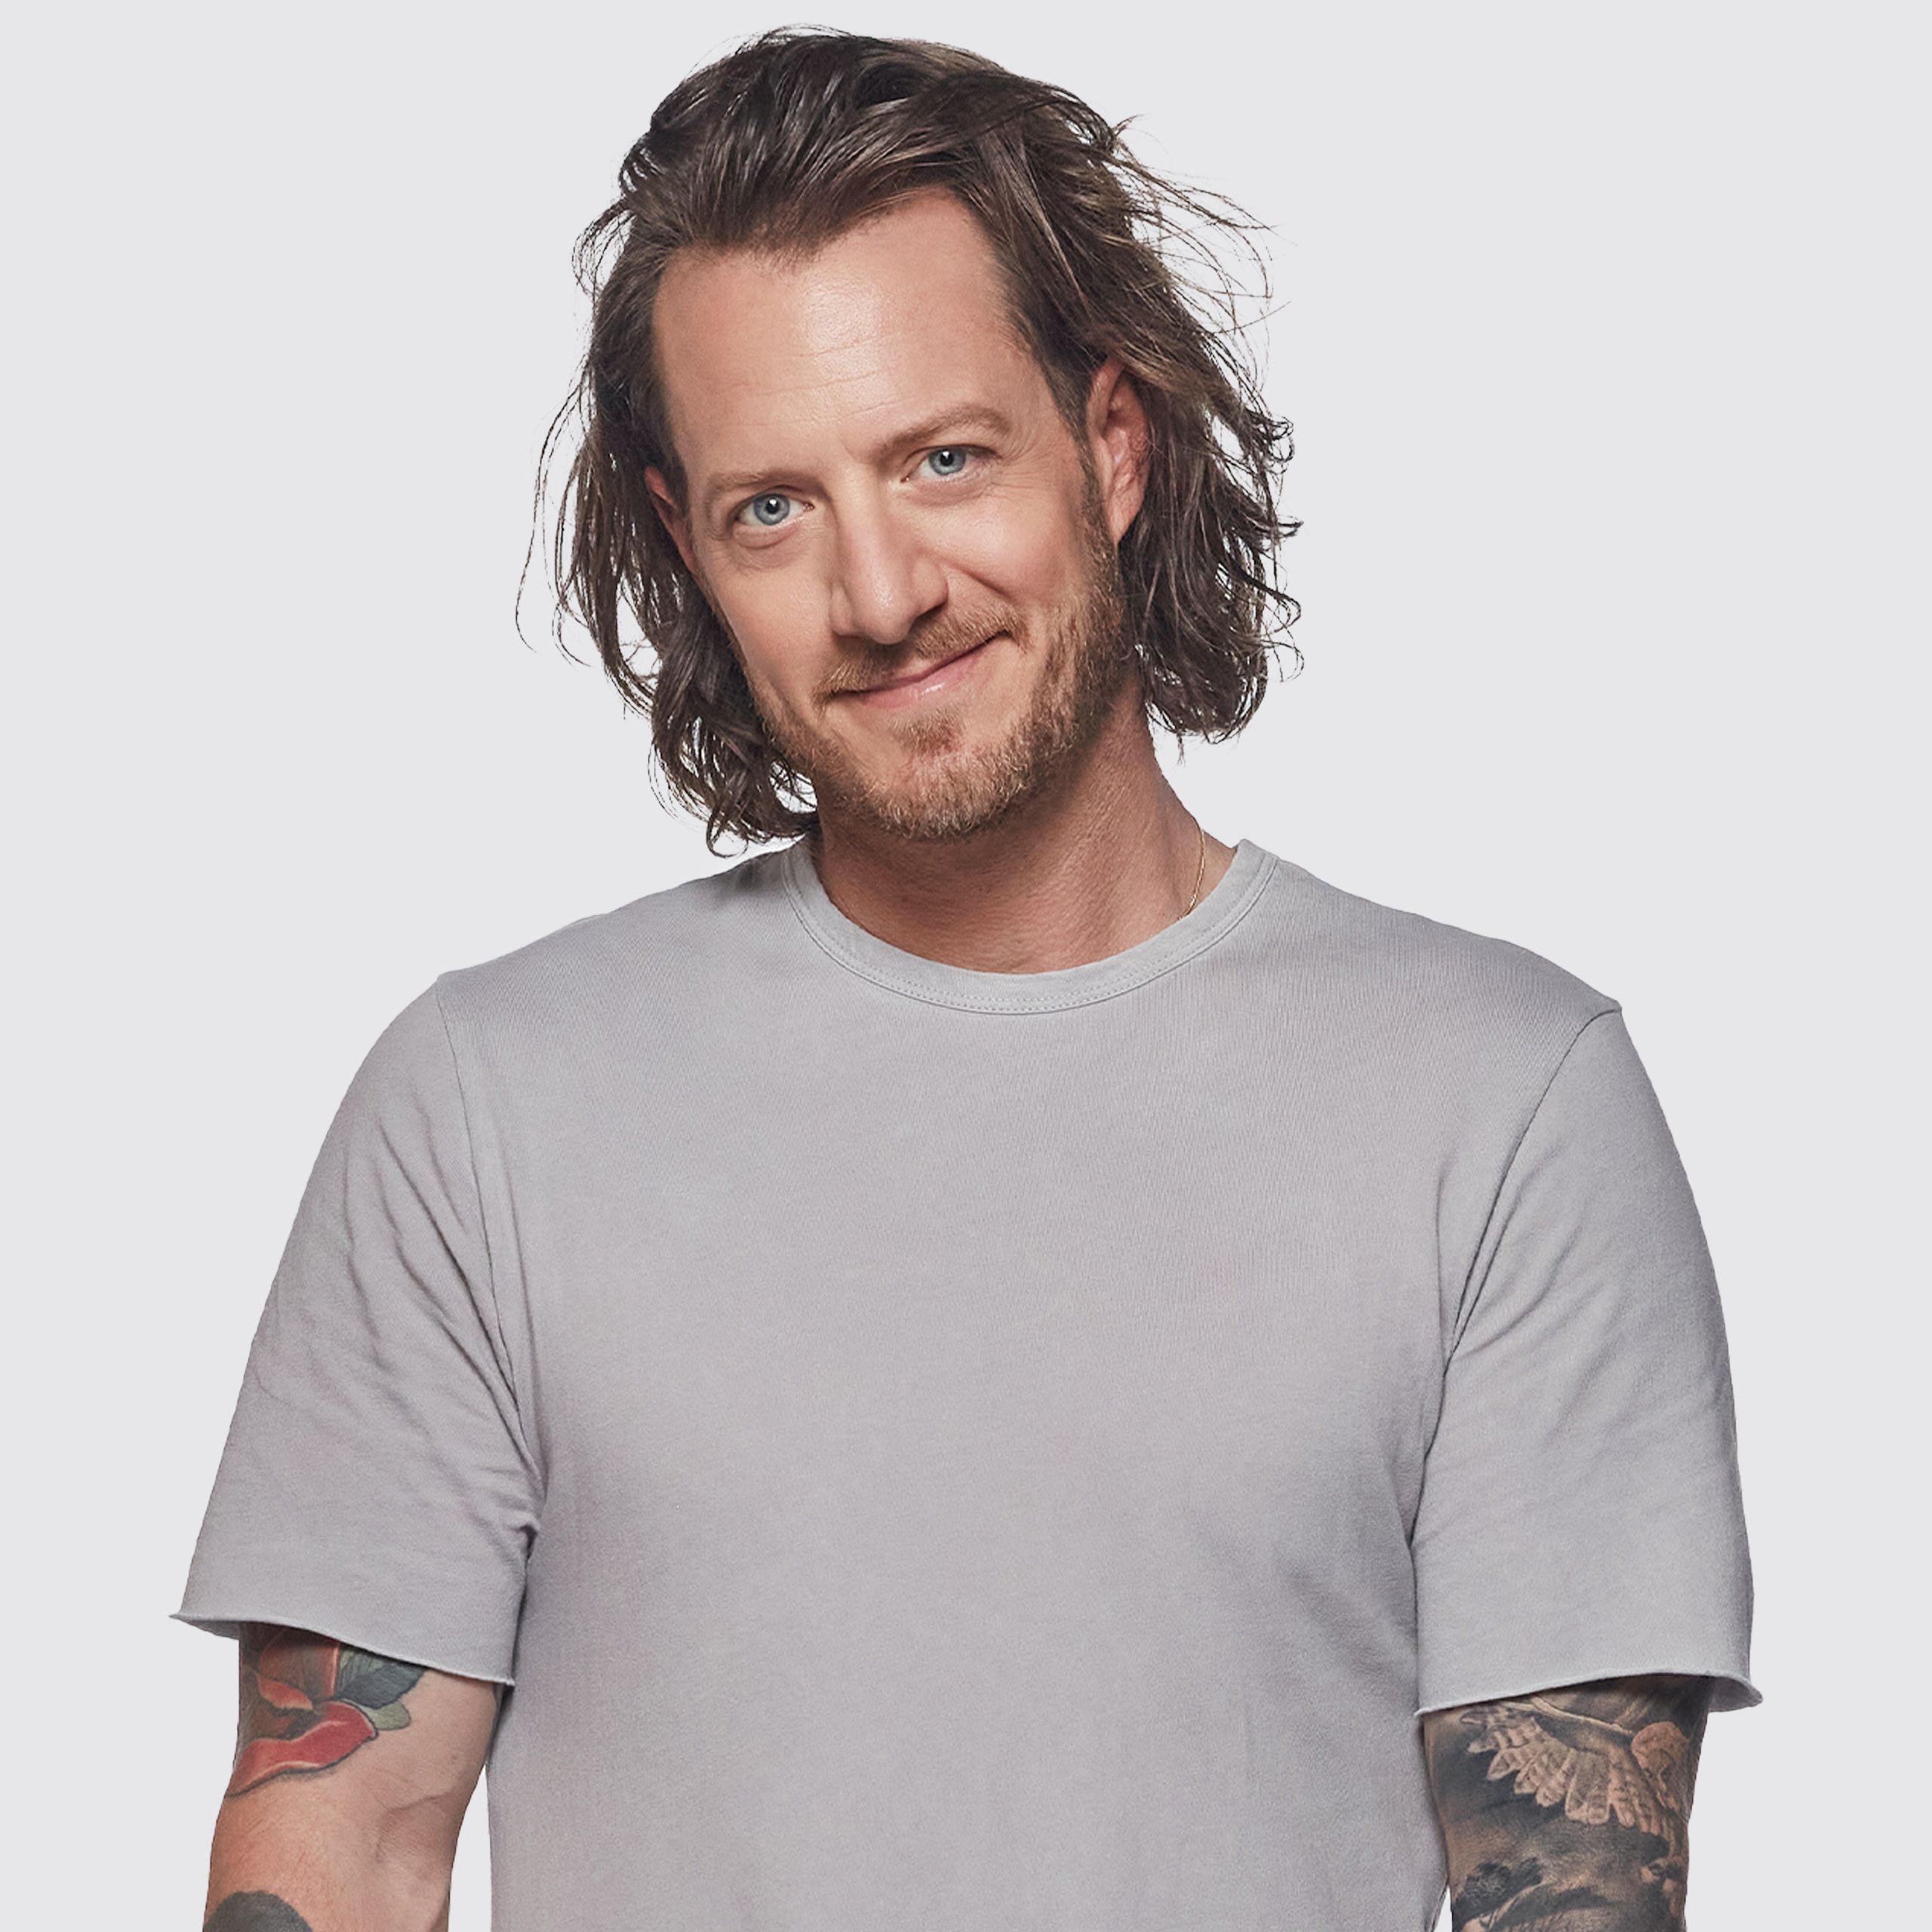 TYLER HUBBARD READIES NEW MUSIC FOR SOLO PROJECT